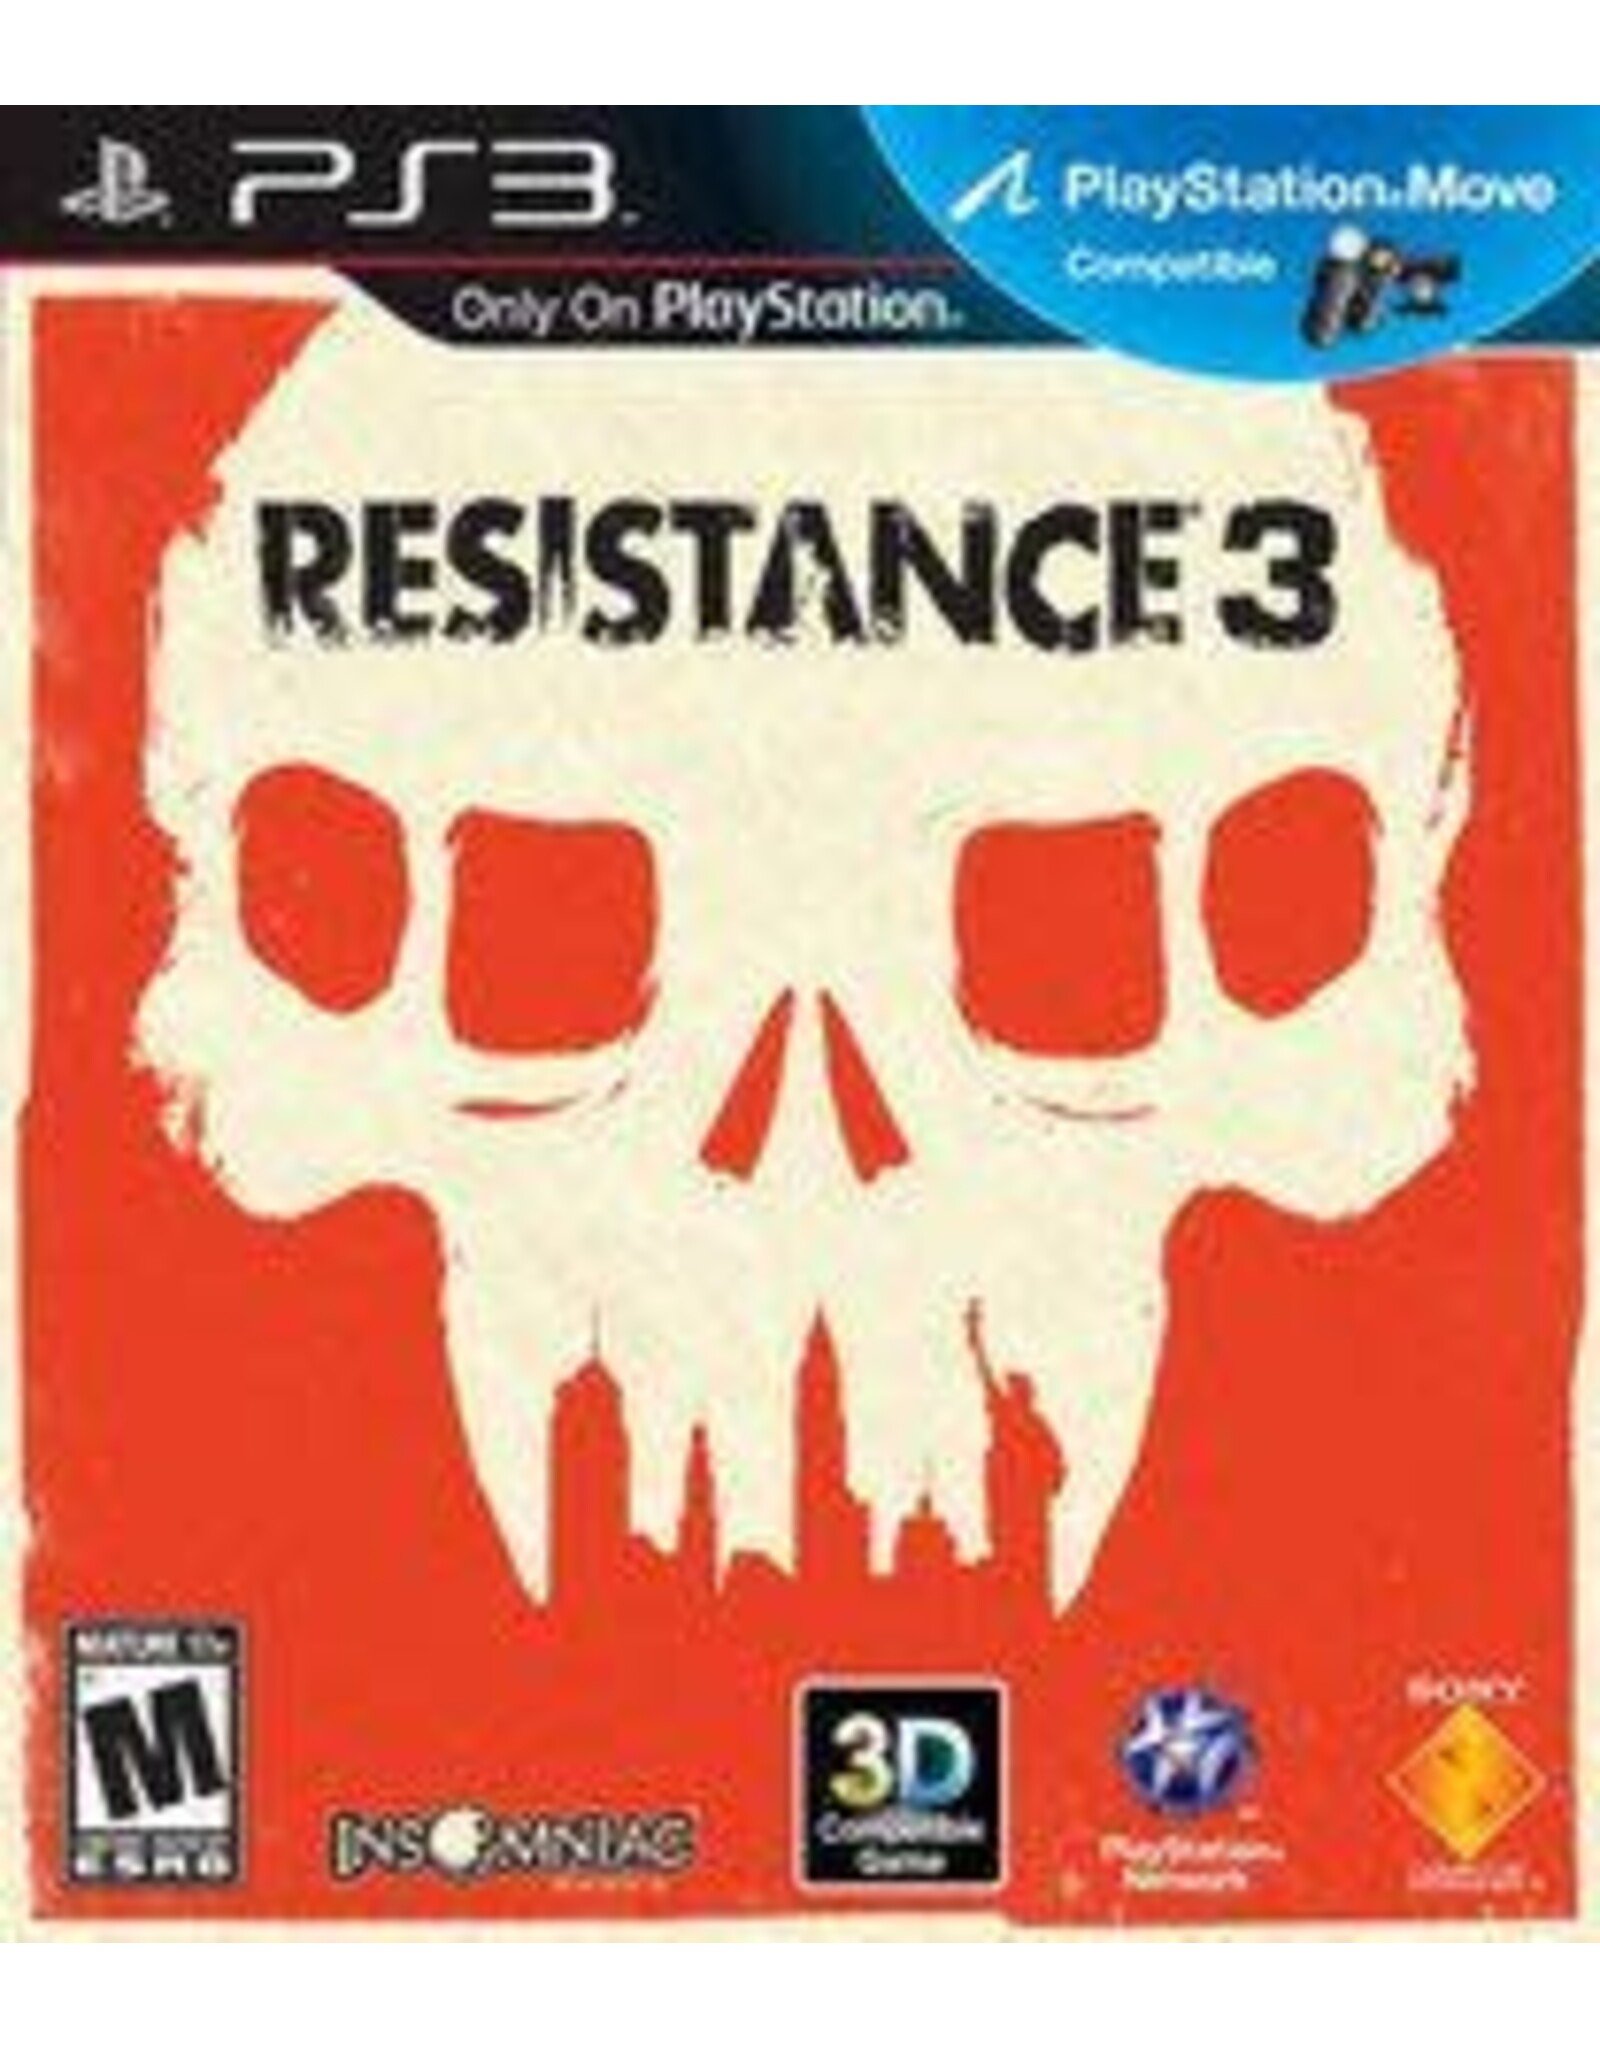 Playstation 3 Resistance 3 (Used, No Manual)